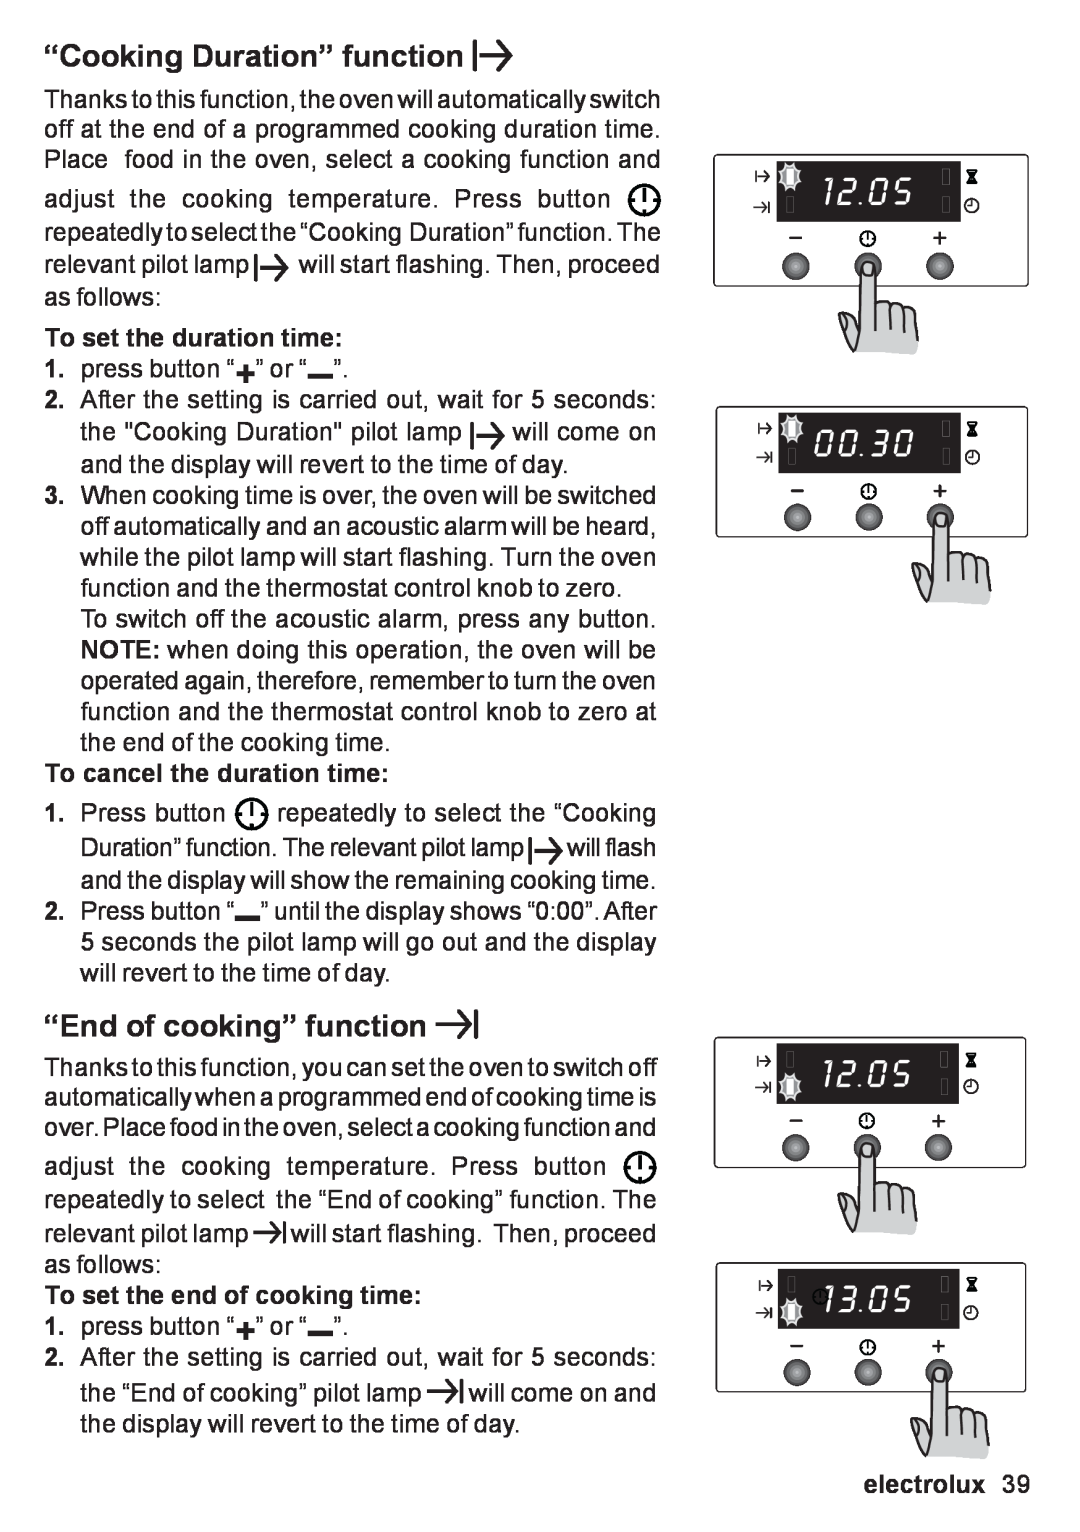 Electrolux EOB 53003 “Cooking Duration” function, “End of cooking” function, To set the duration time, electrolux 